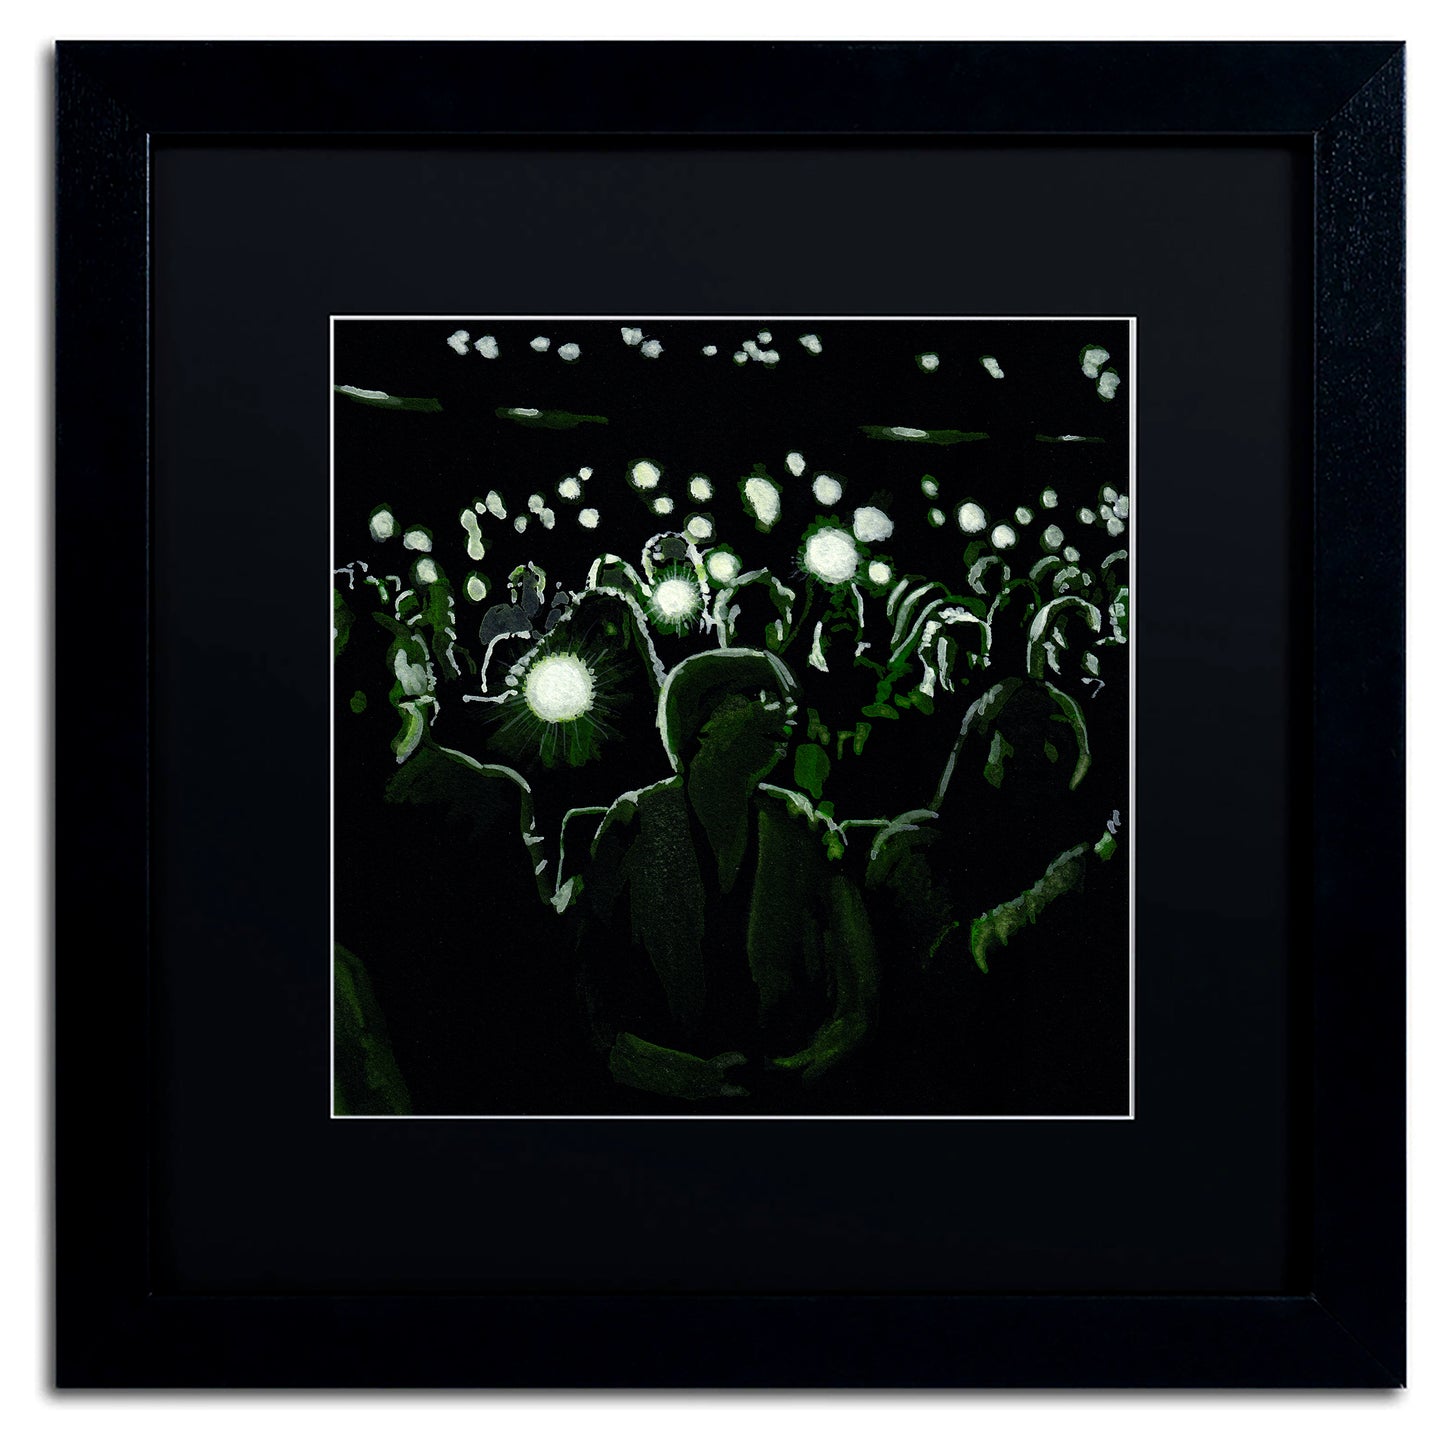 Lights in the Theater, Gouache on Black Paper, Audience, Original Painting